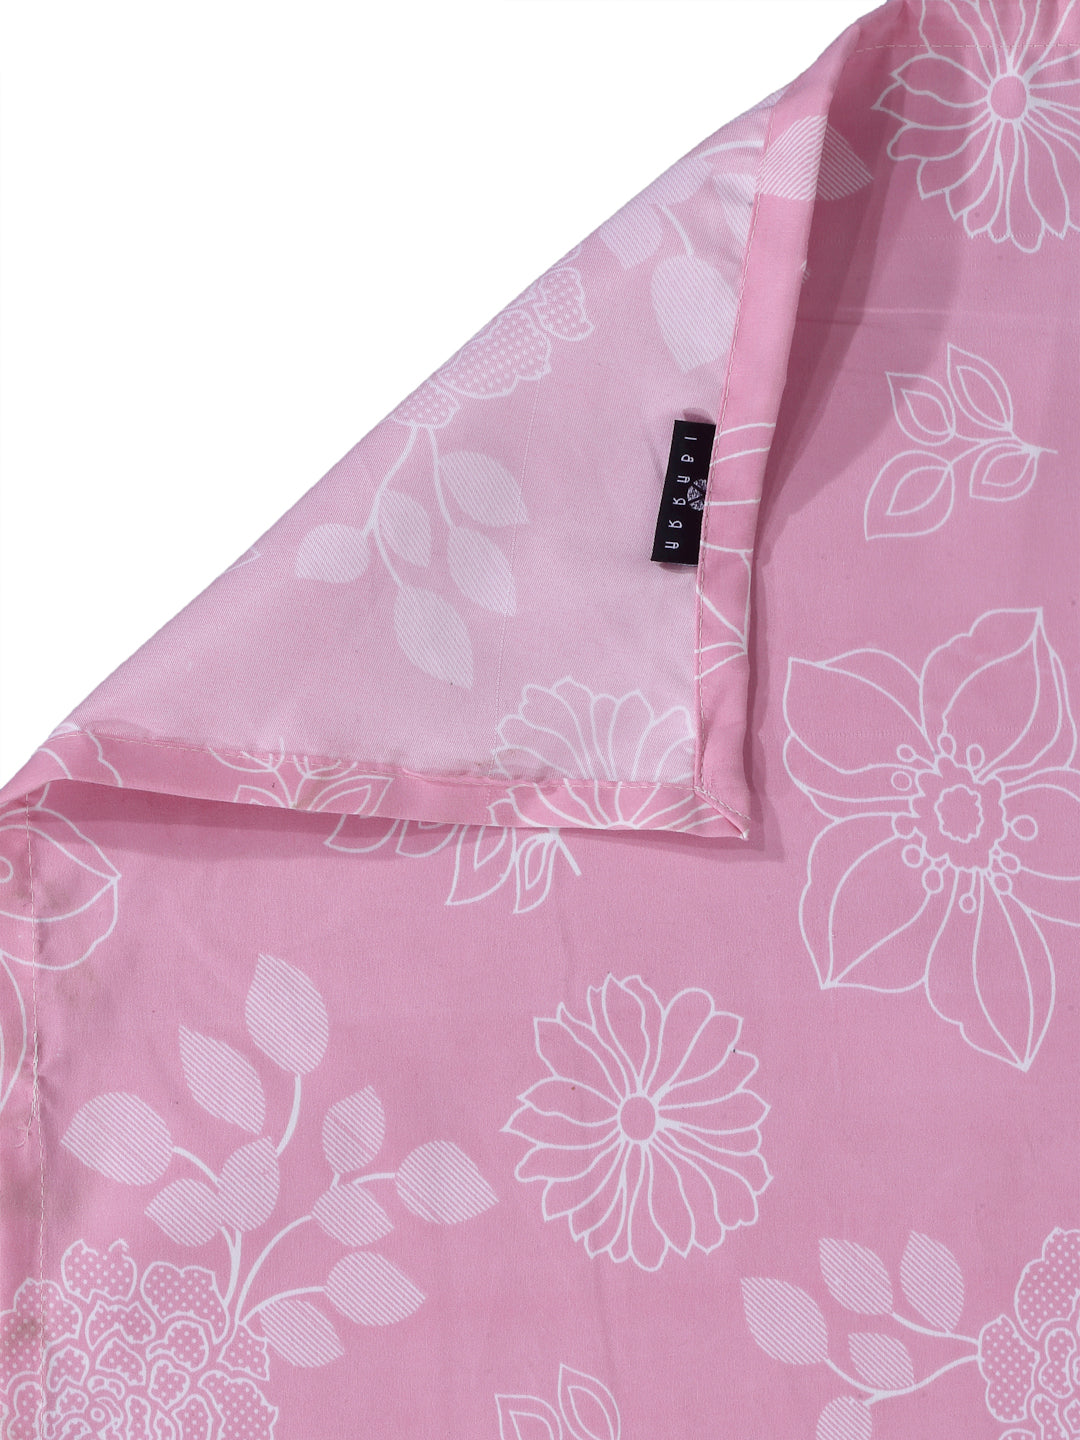 Arrabi Pink Floral TC Cotton Blend King Size Bookfold Bedsheet with 2 Pillow Covers (250 X 220 cm)